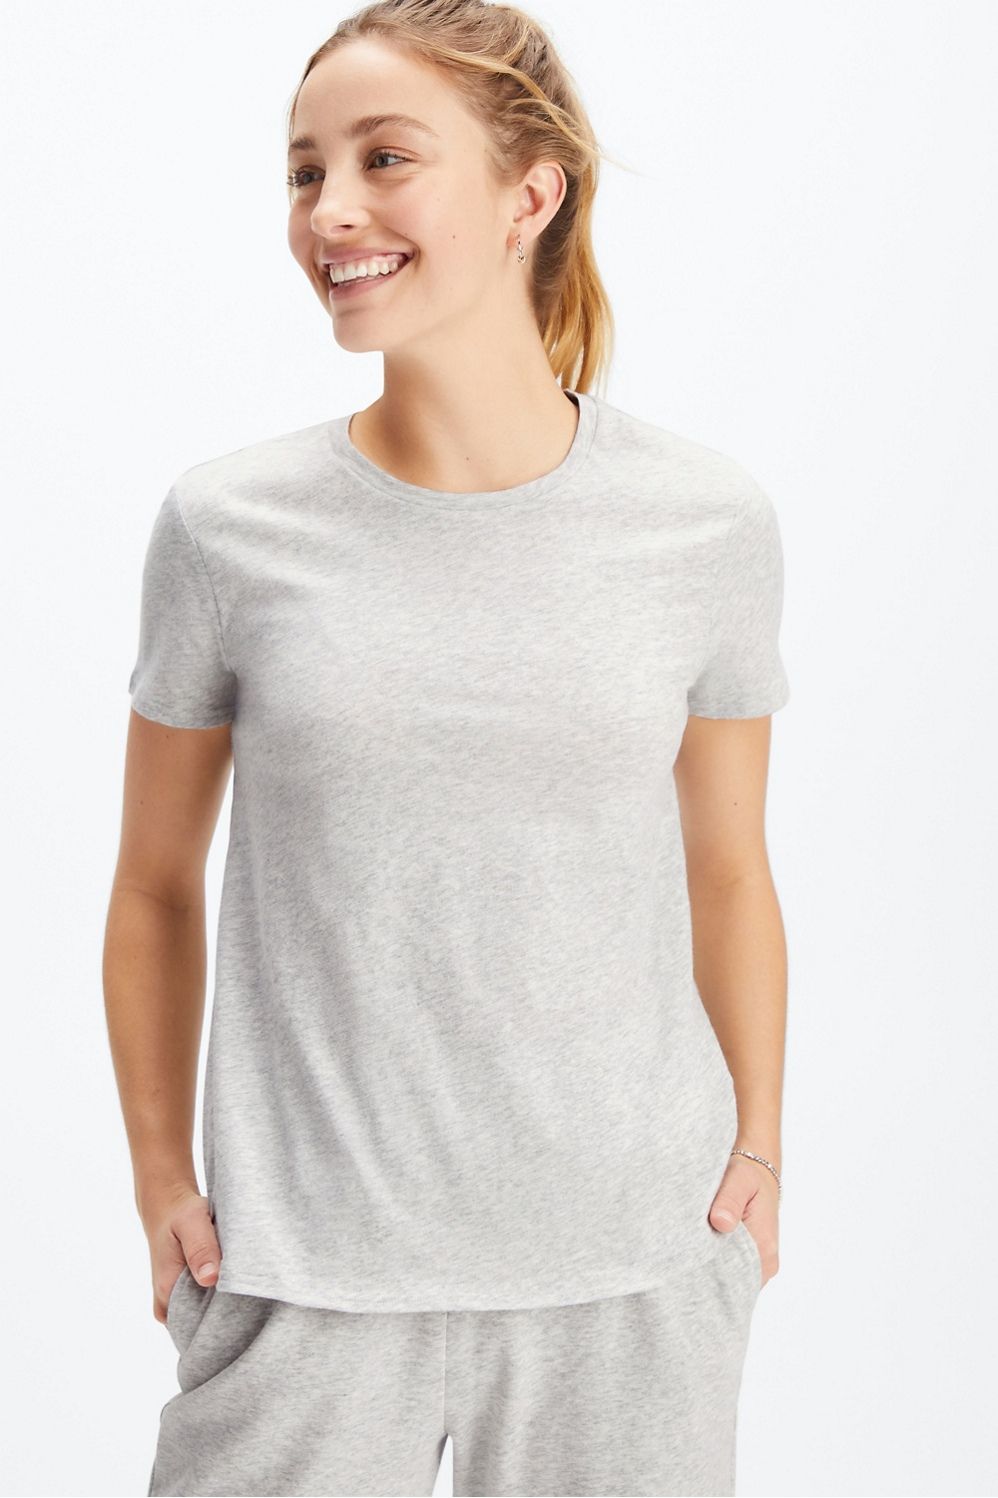 100% Cotton Jersey Tee | Fabletics - North America